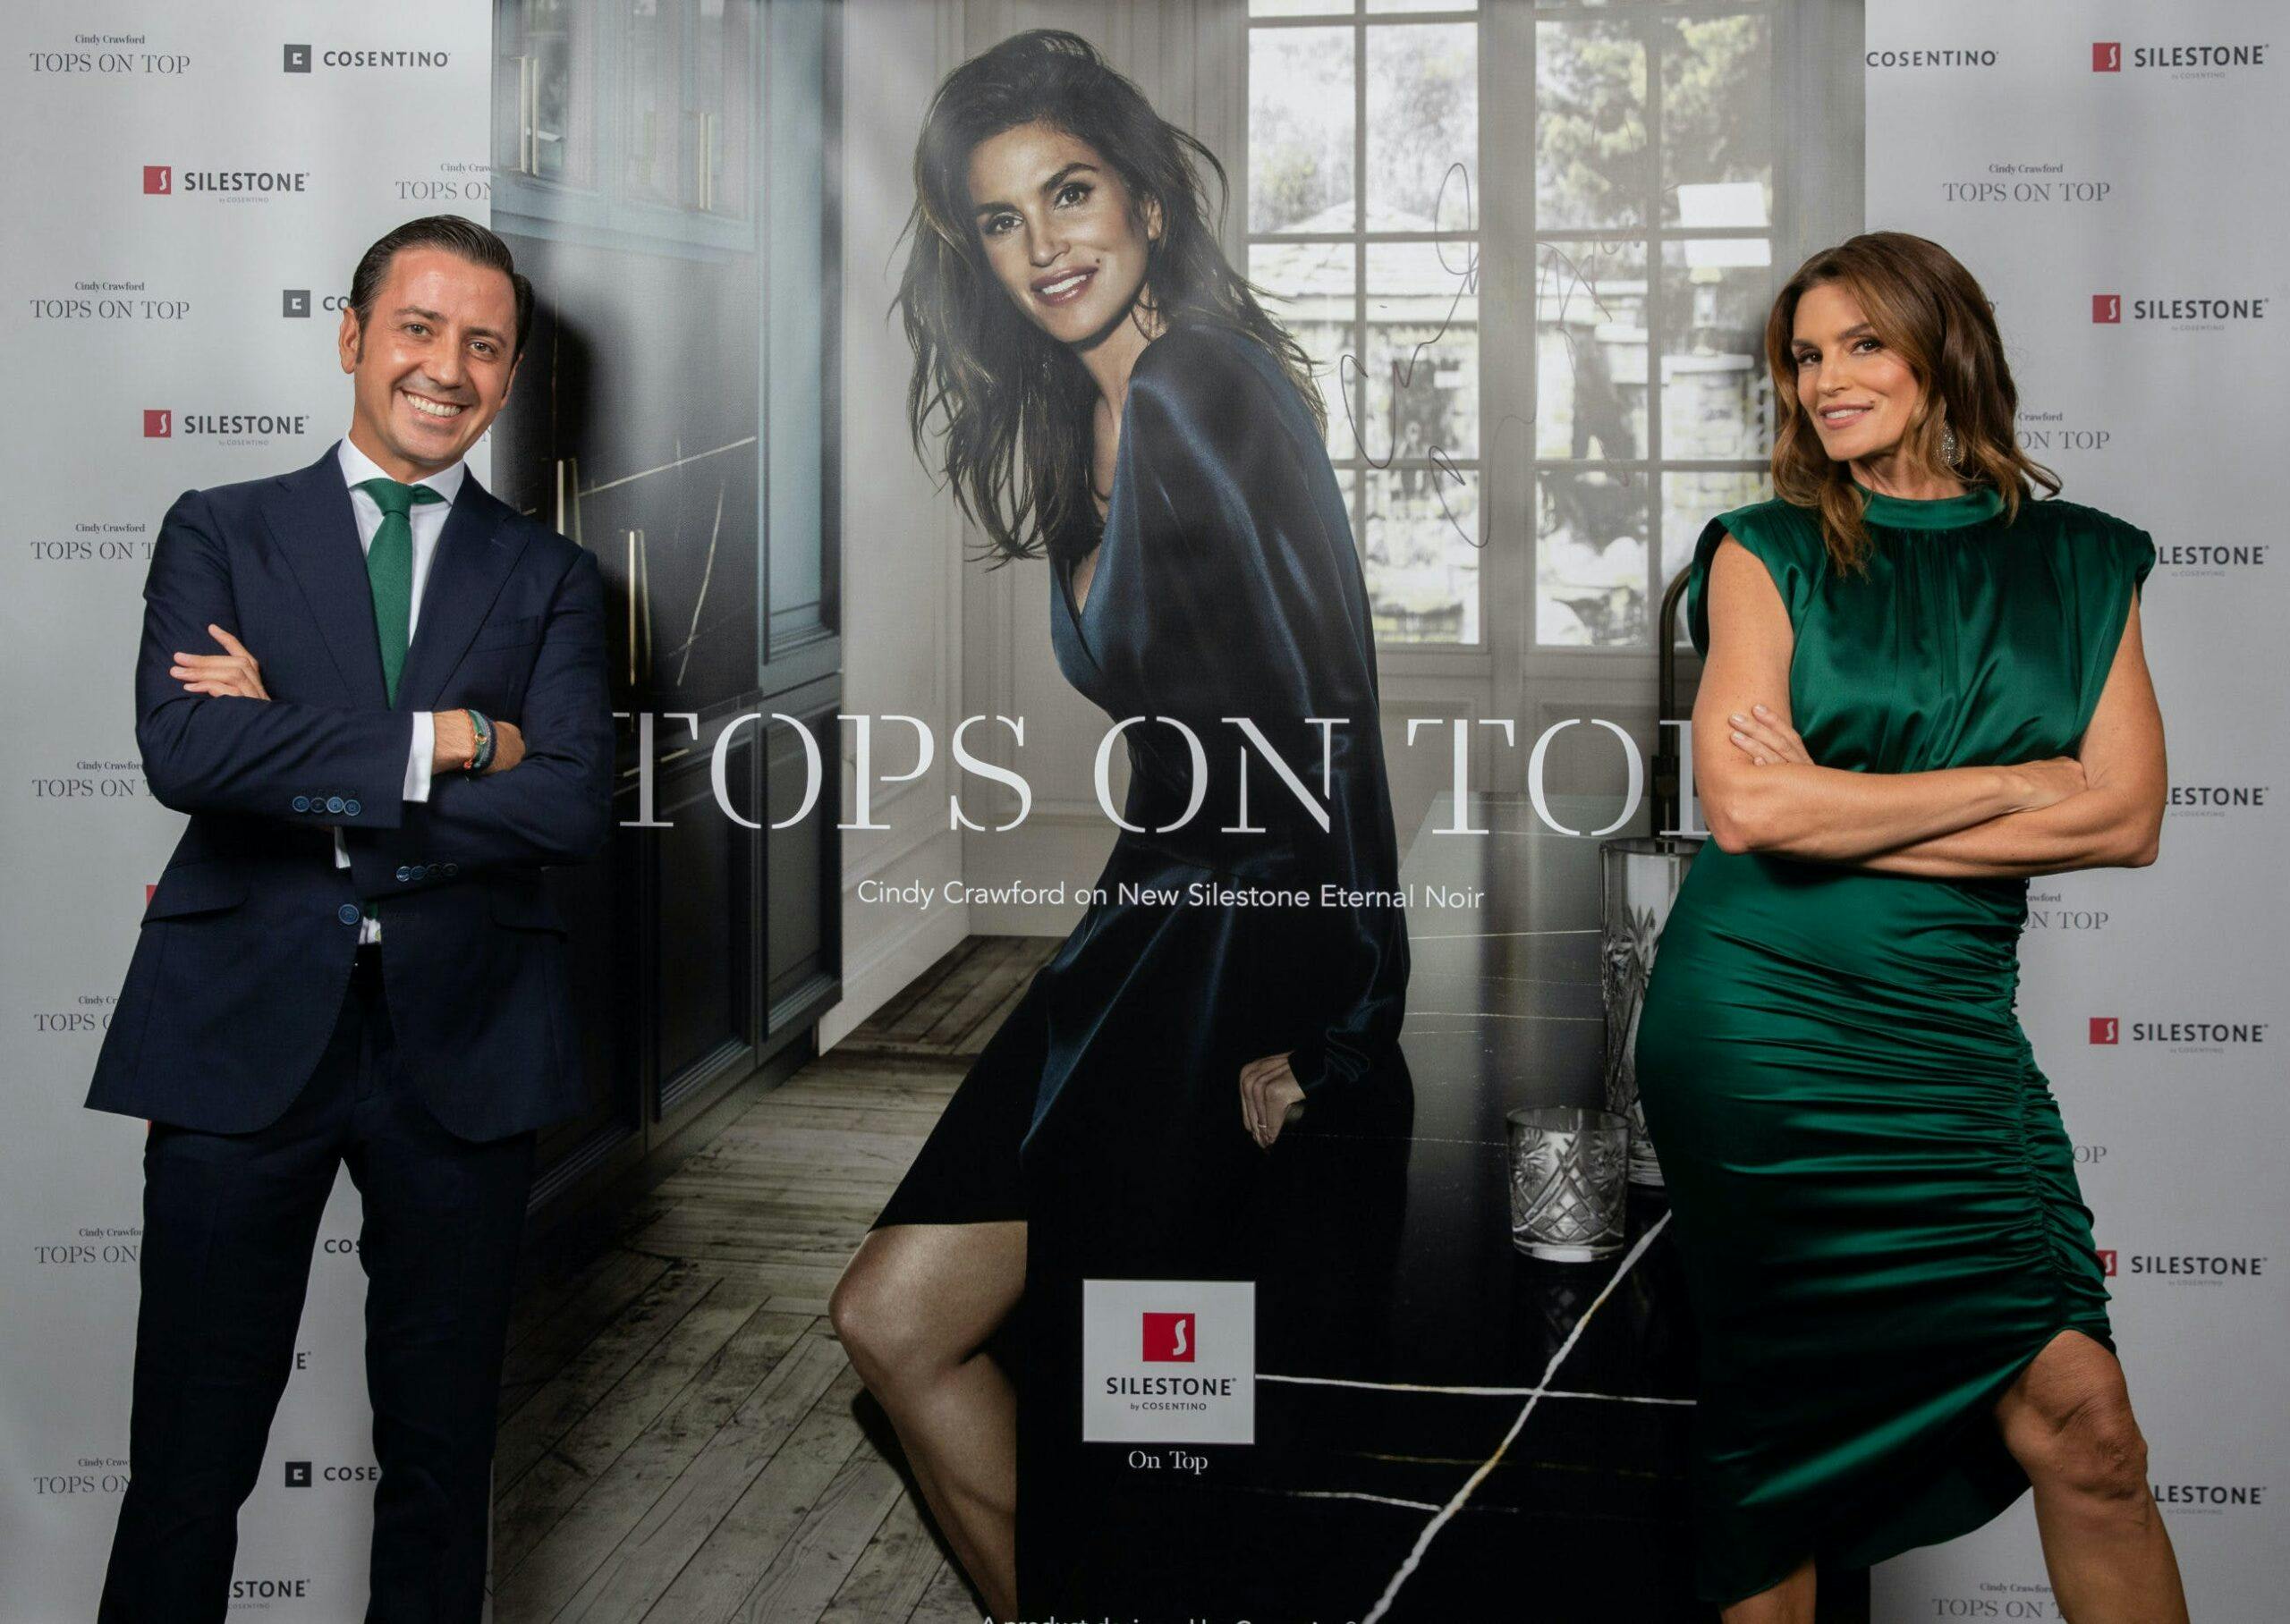 Image 31 of Eduardo Cosentino y Cindy Crawford Tops On Top 2019 Londres 3 scaled in Silestone® Presents its New "Tops on Top 2019" Campaign Featuring Cindy Crawford - Cosentino